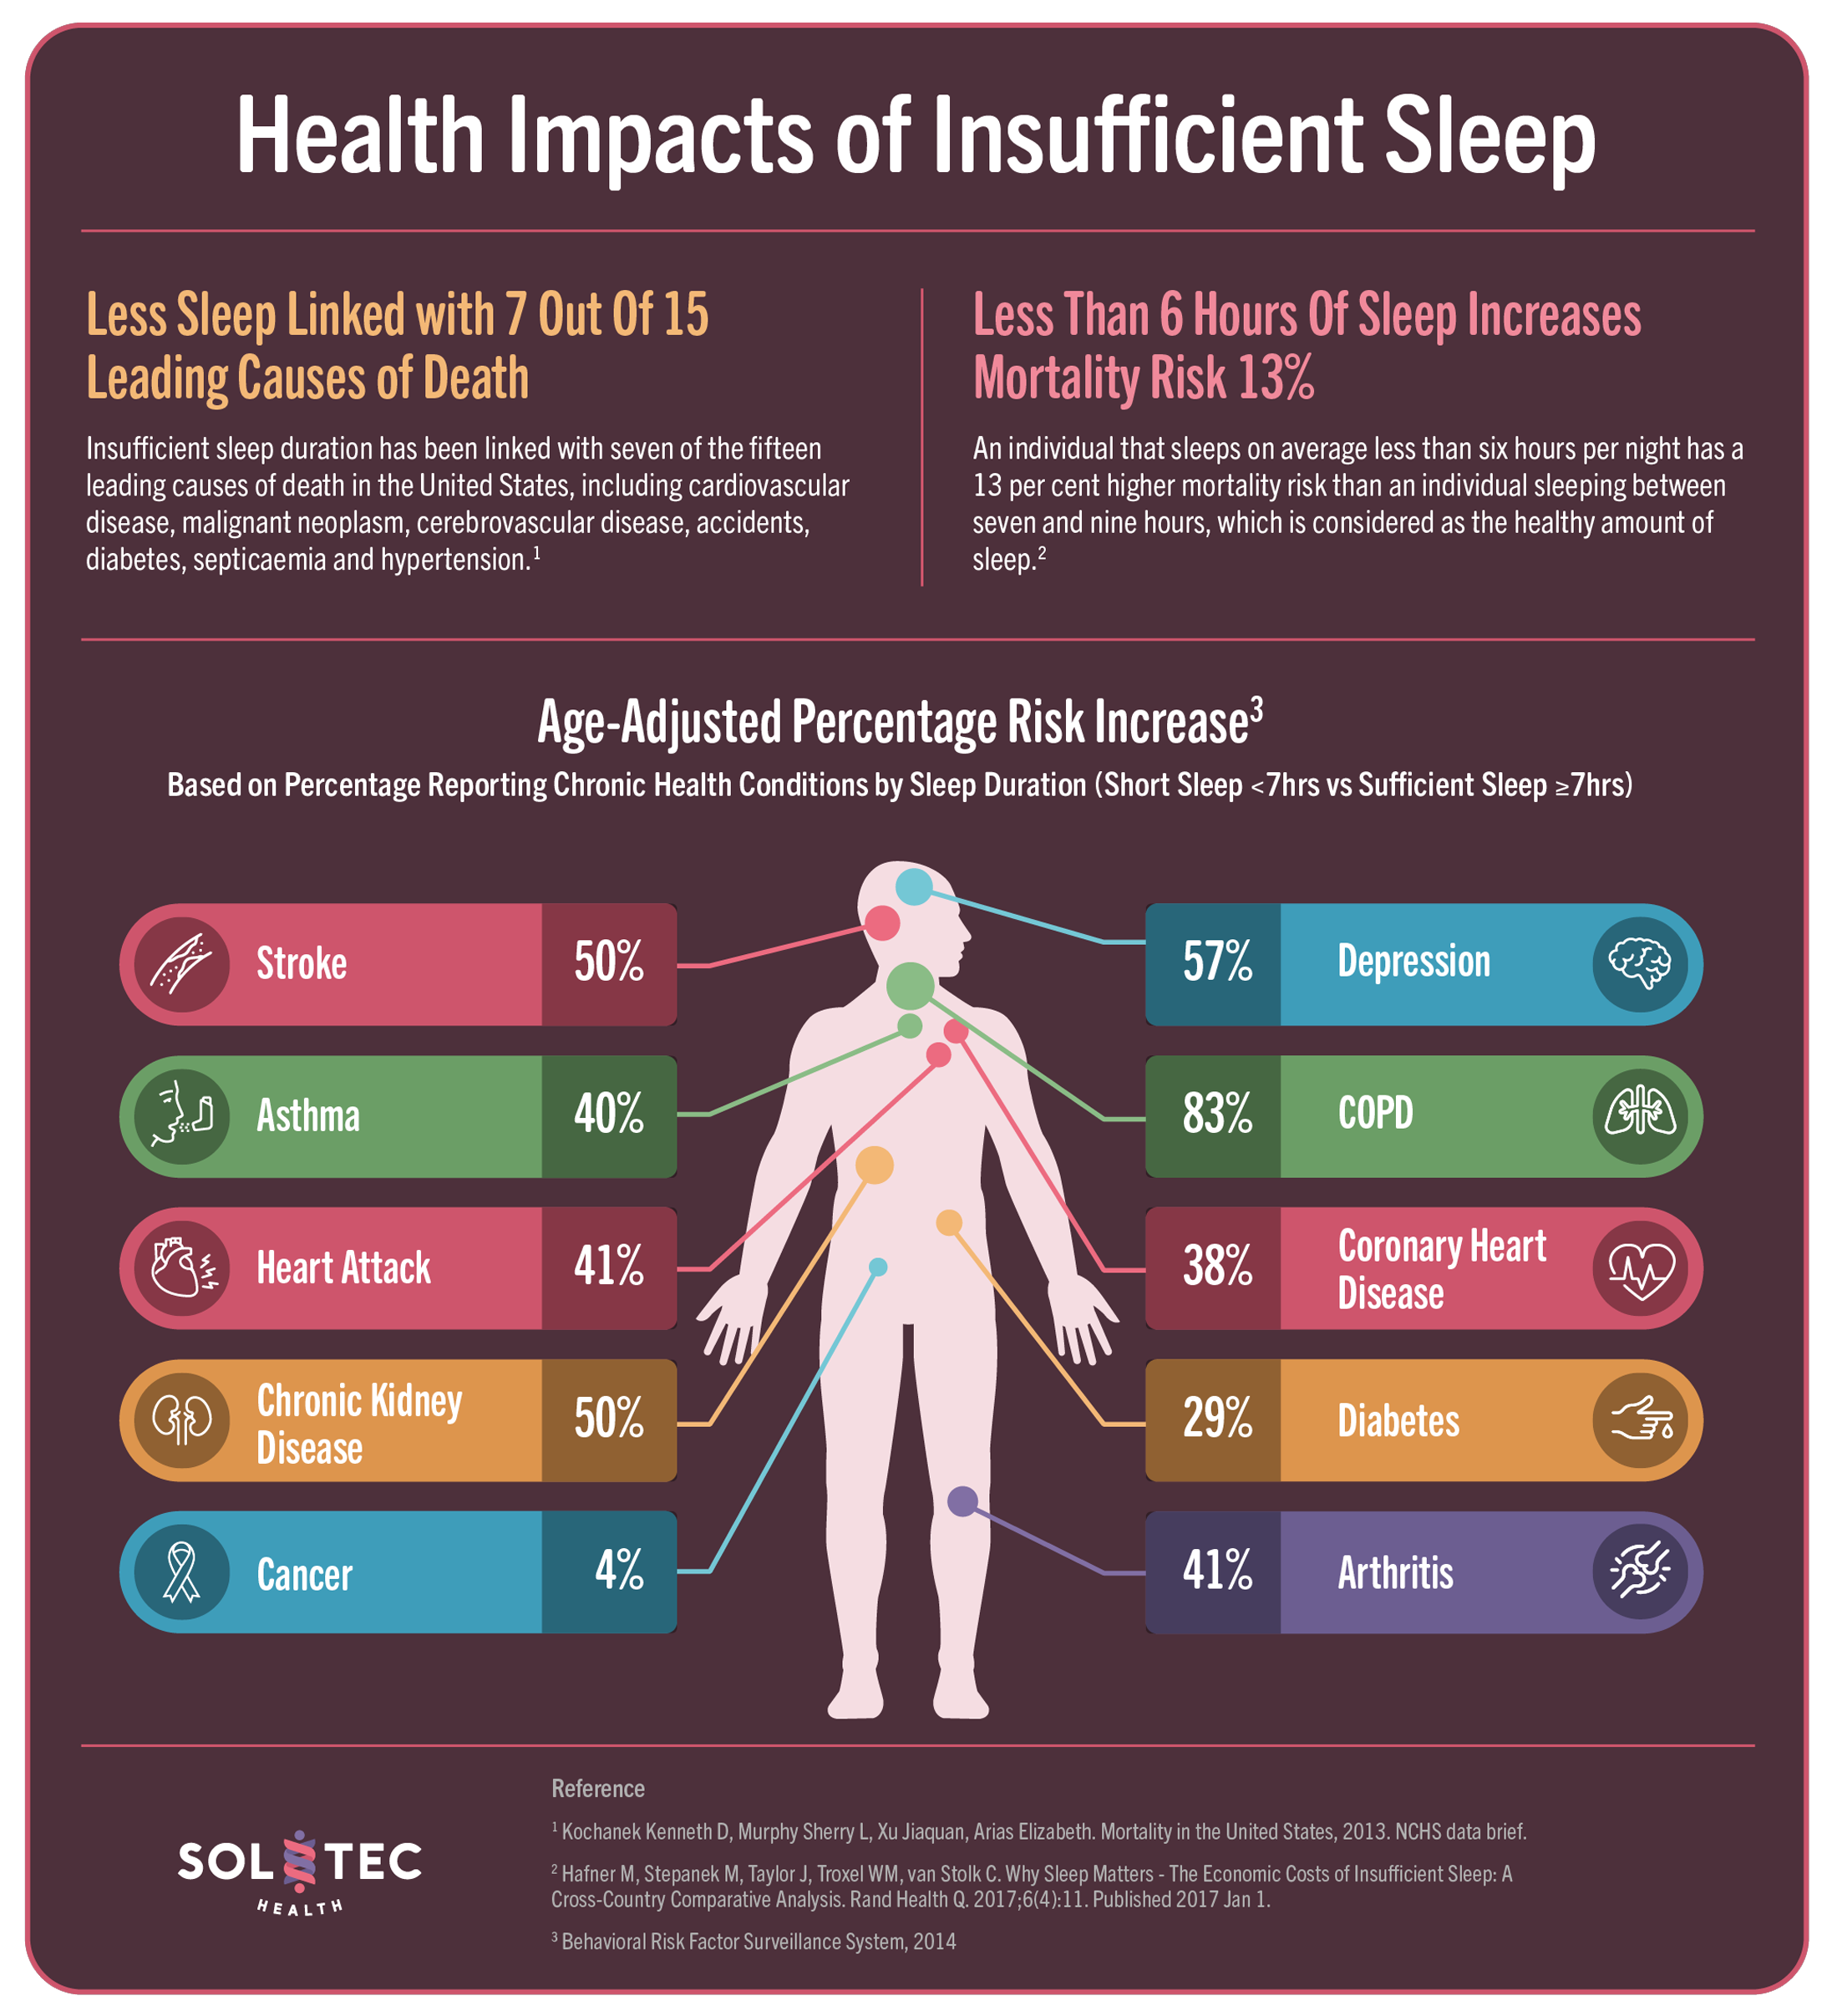 Health Impacts of Insufficient Sleep Image